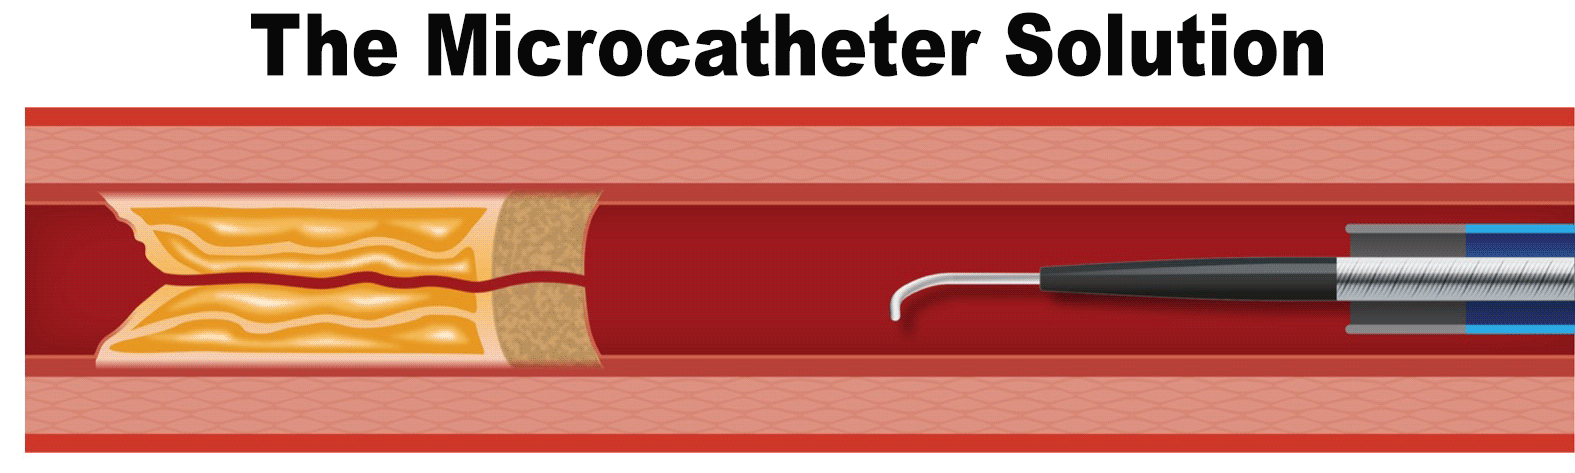 animated gif showing microcatheter with guide wire within allowing the guide wire to move through the tight lesion, then the microcatheter moves through the calicified lesion.